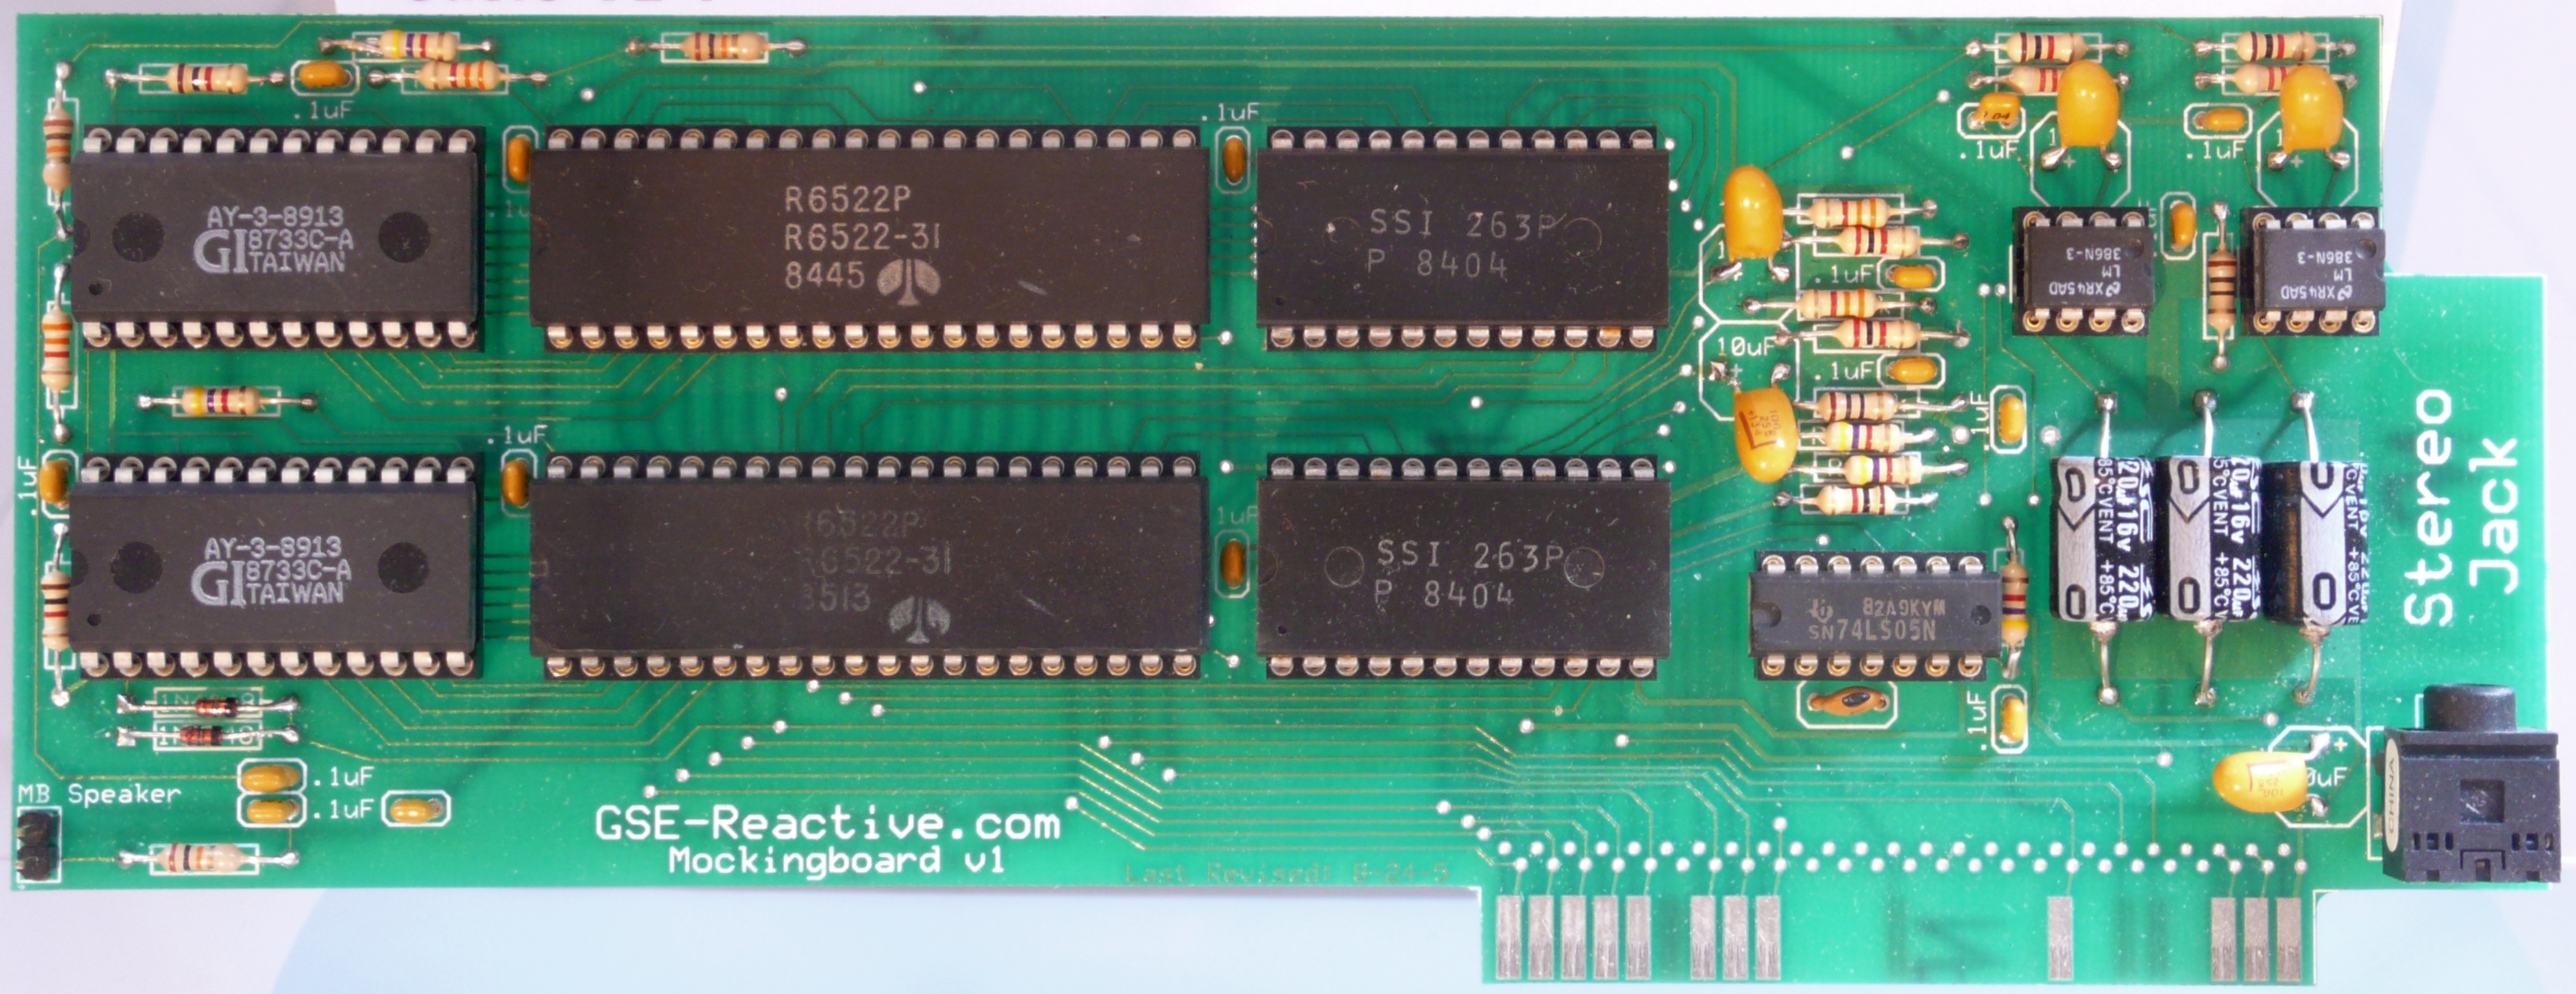 File:KiCad-Pcbnew-Hackrf-One.png - Wikimedia Commons